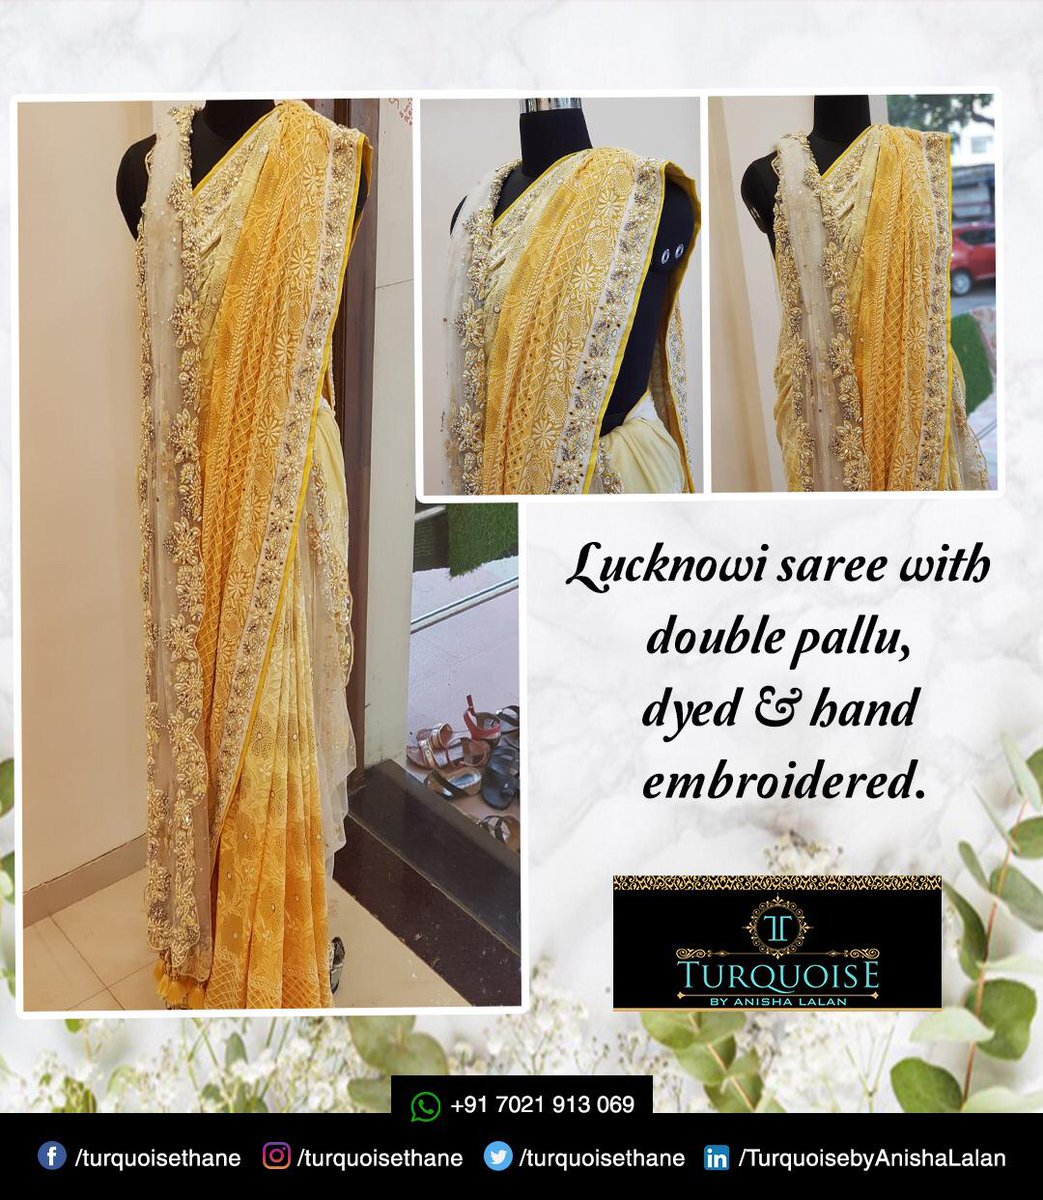 Check out this Lucknowi saree with double pallu, dyed & hand embroidered.😍🌻

To get your outfits customized by us, call or WhatsApp us at - +91 7021913069 or Visit us at - Shop No. 12 Elegance Tower, LBS Marg, Near Coffee by Di Bella Thane (W) 400602
-
#lucknowisaree